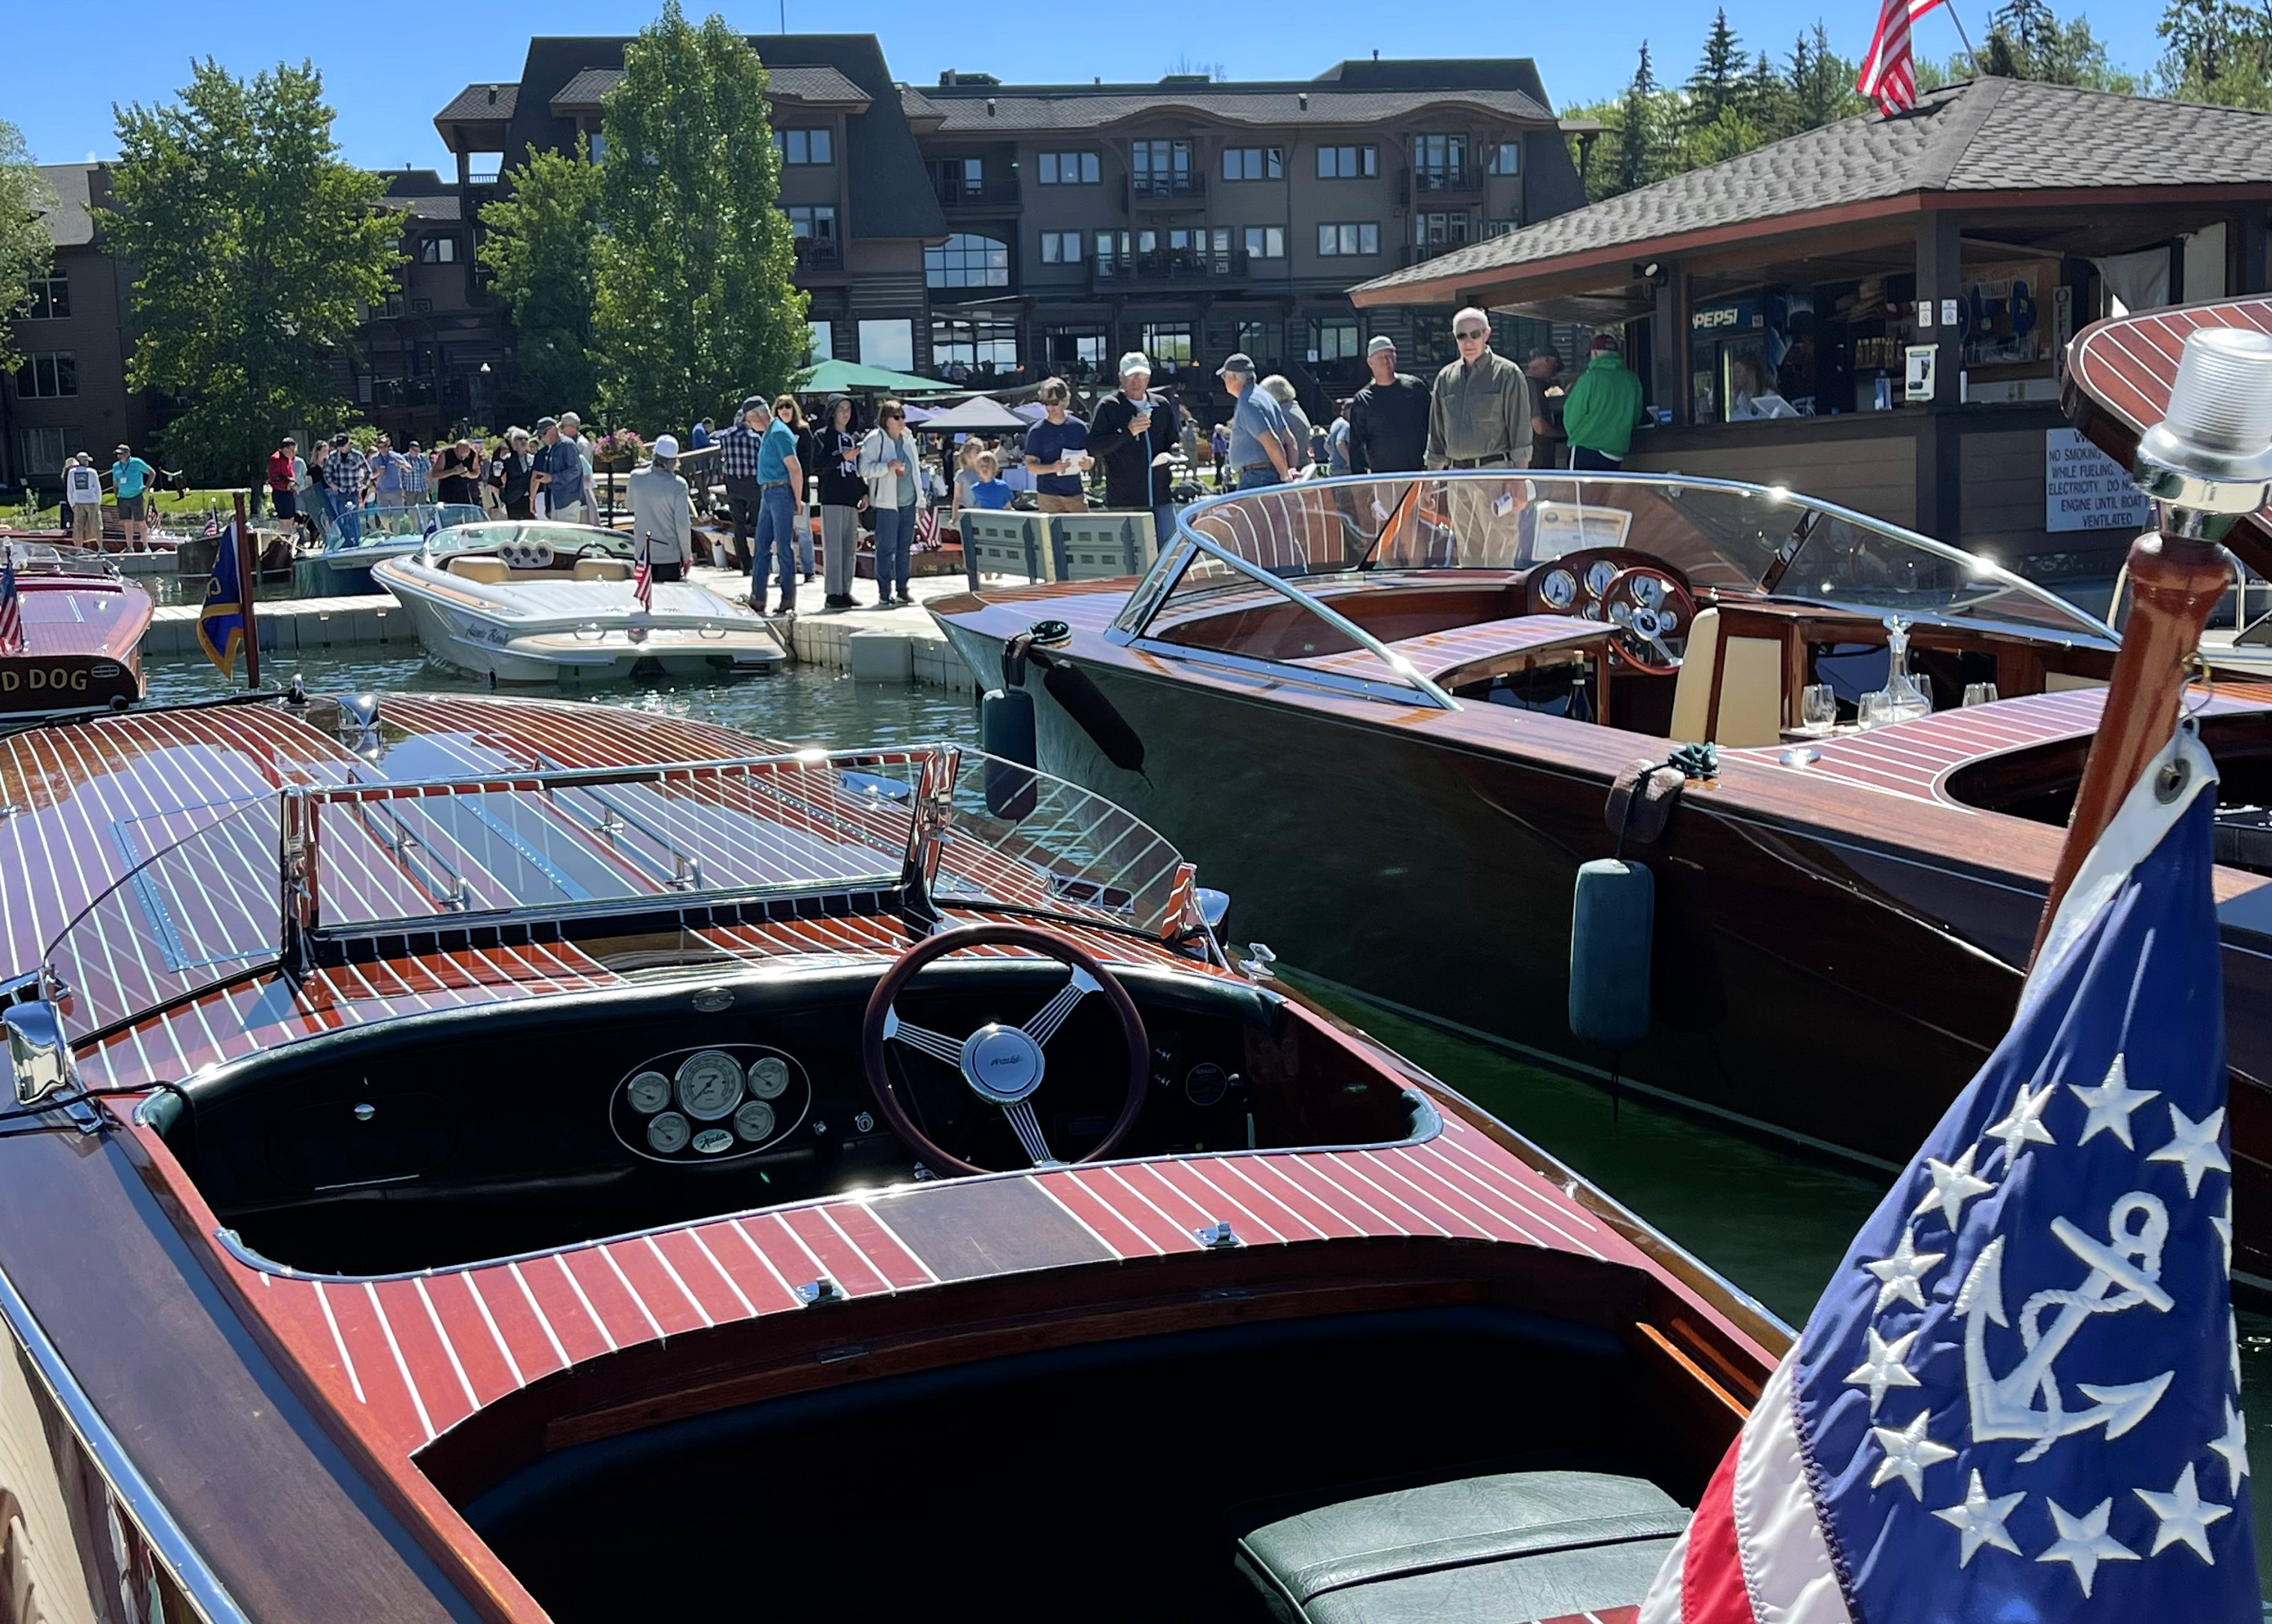 Each year The Marina at Whitefish Lake hosts over 35 new and classic wooden boats.